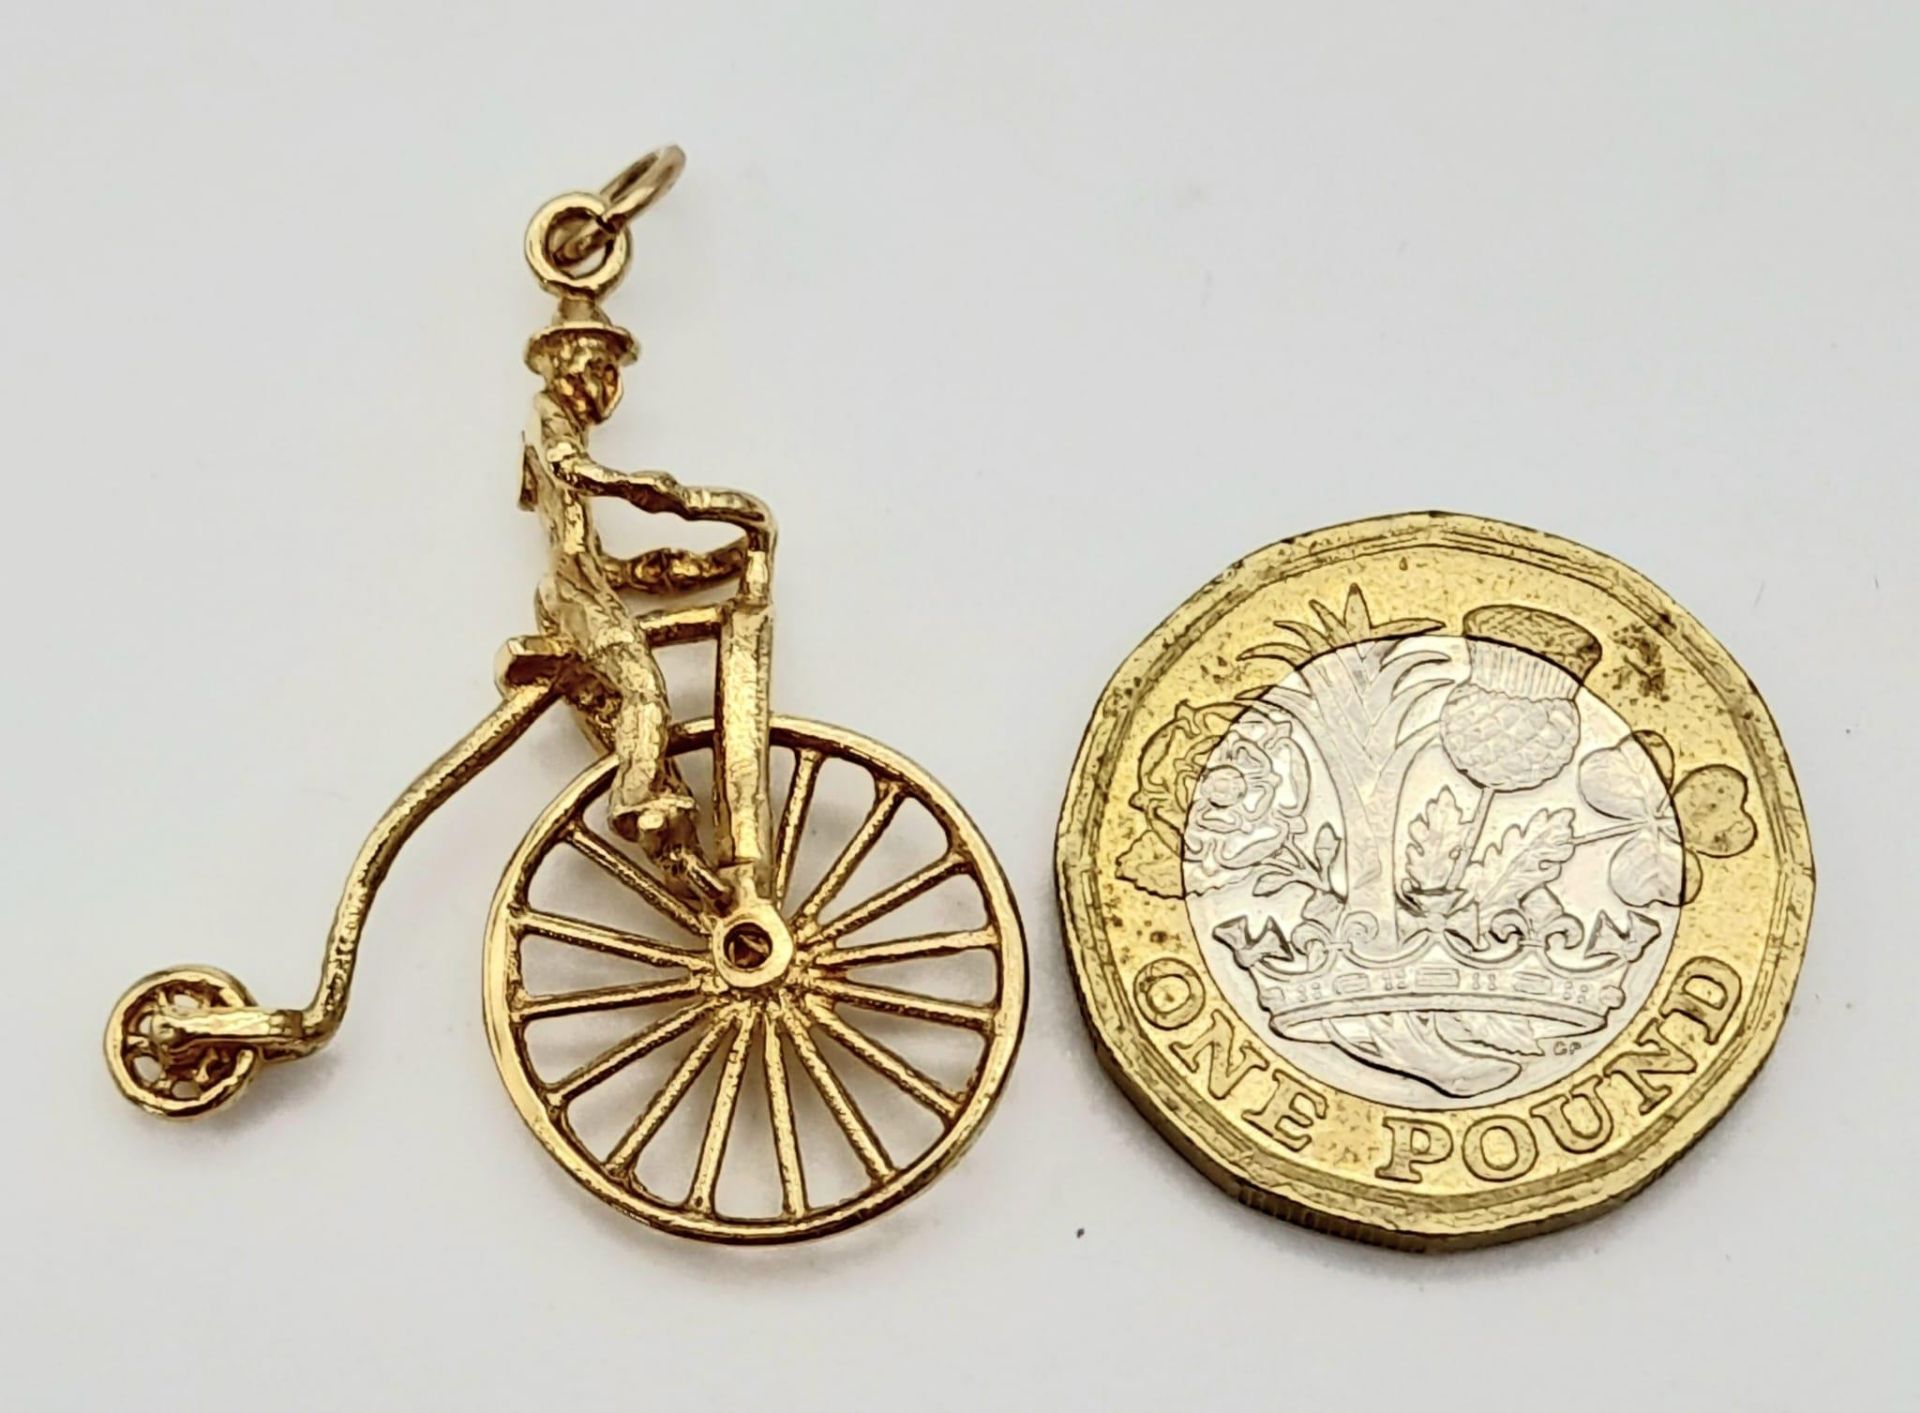 9K YELLOW GOLD PENNY FARTHING CHARM. 3.7G - Image 3 of 3